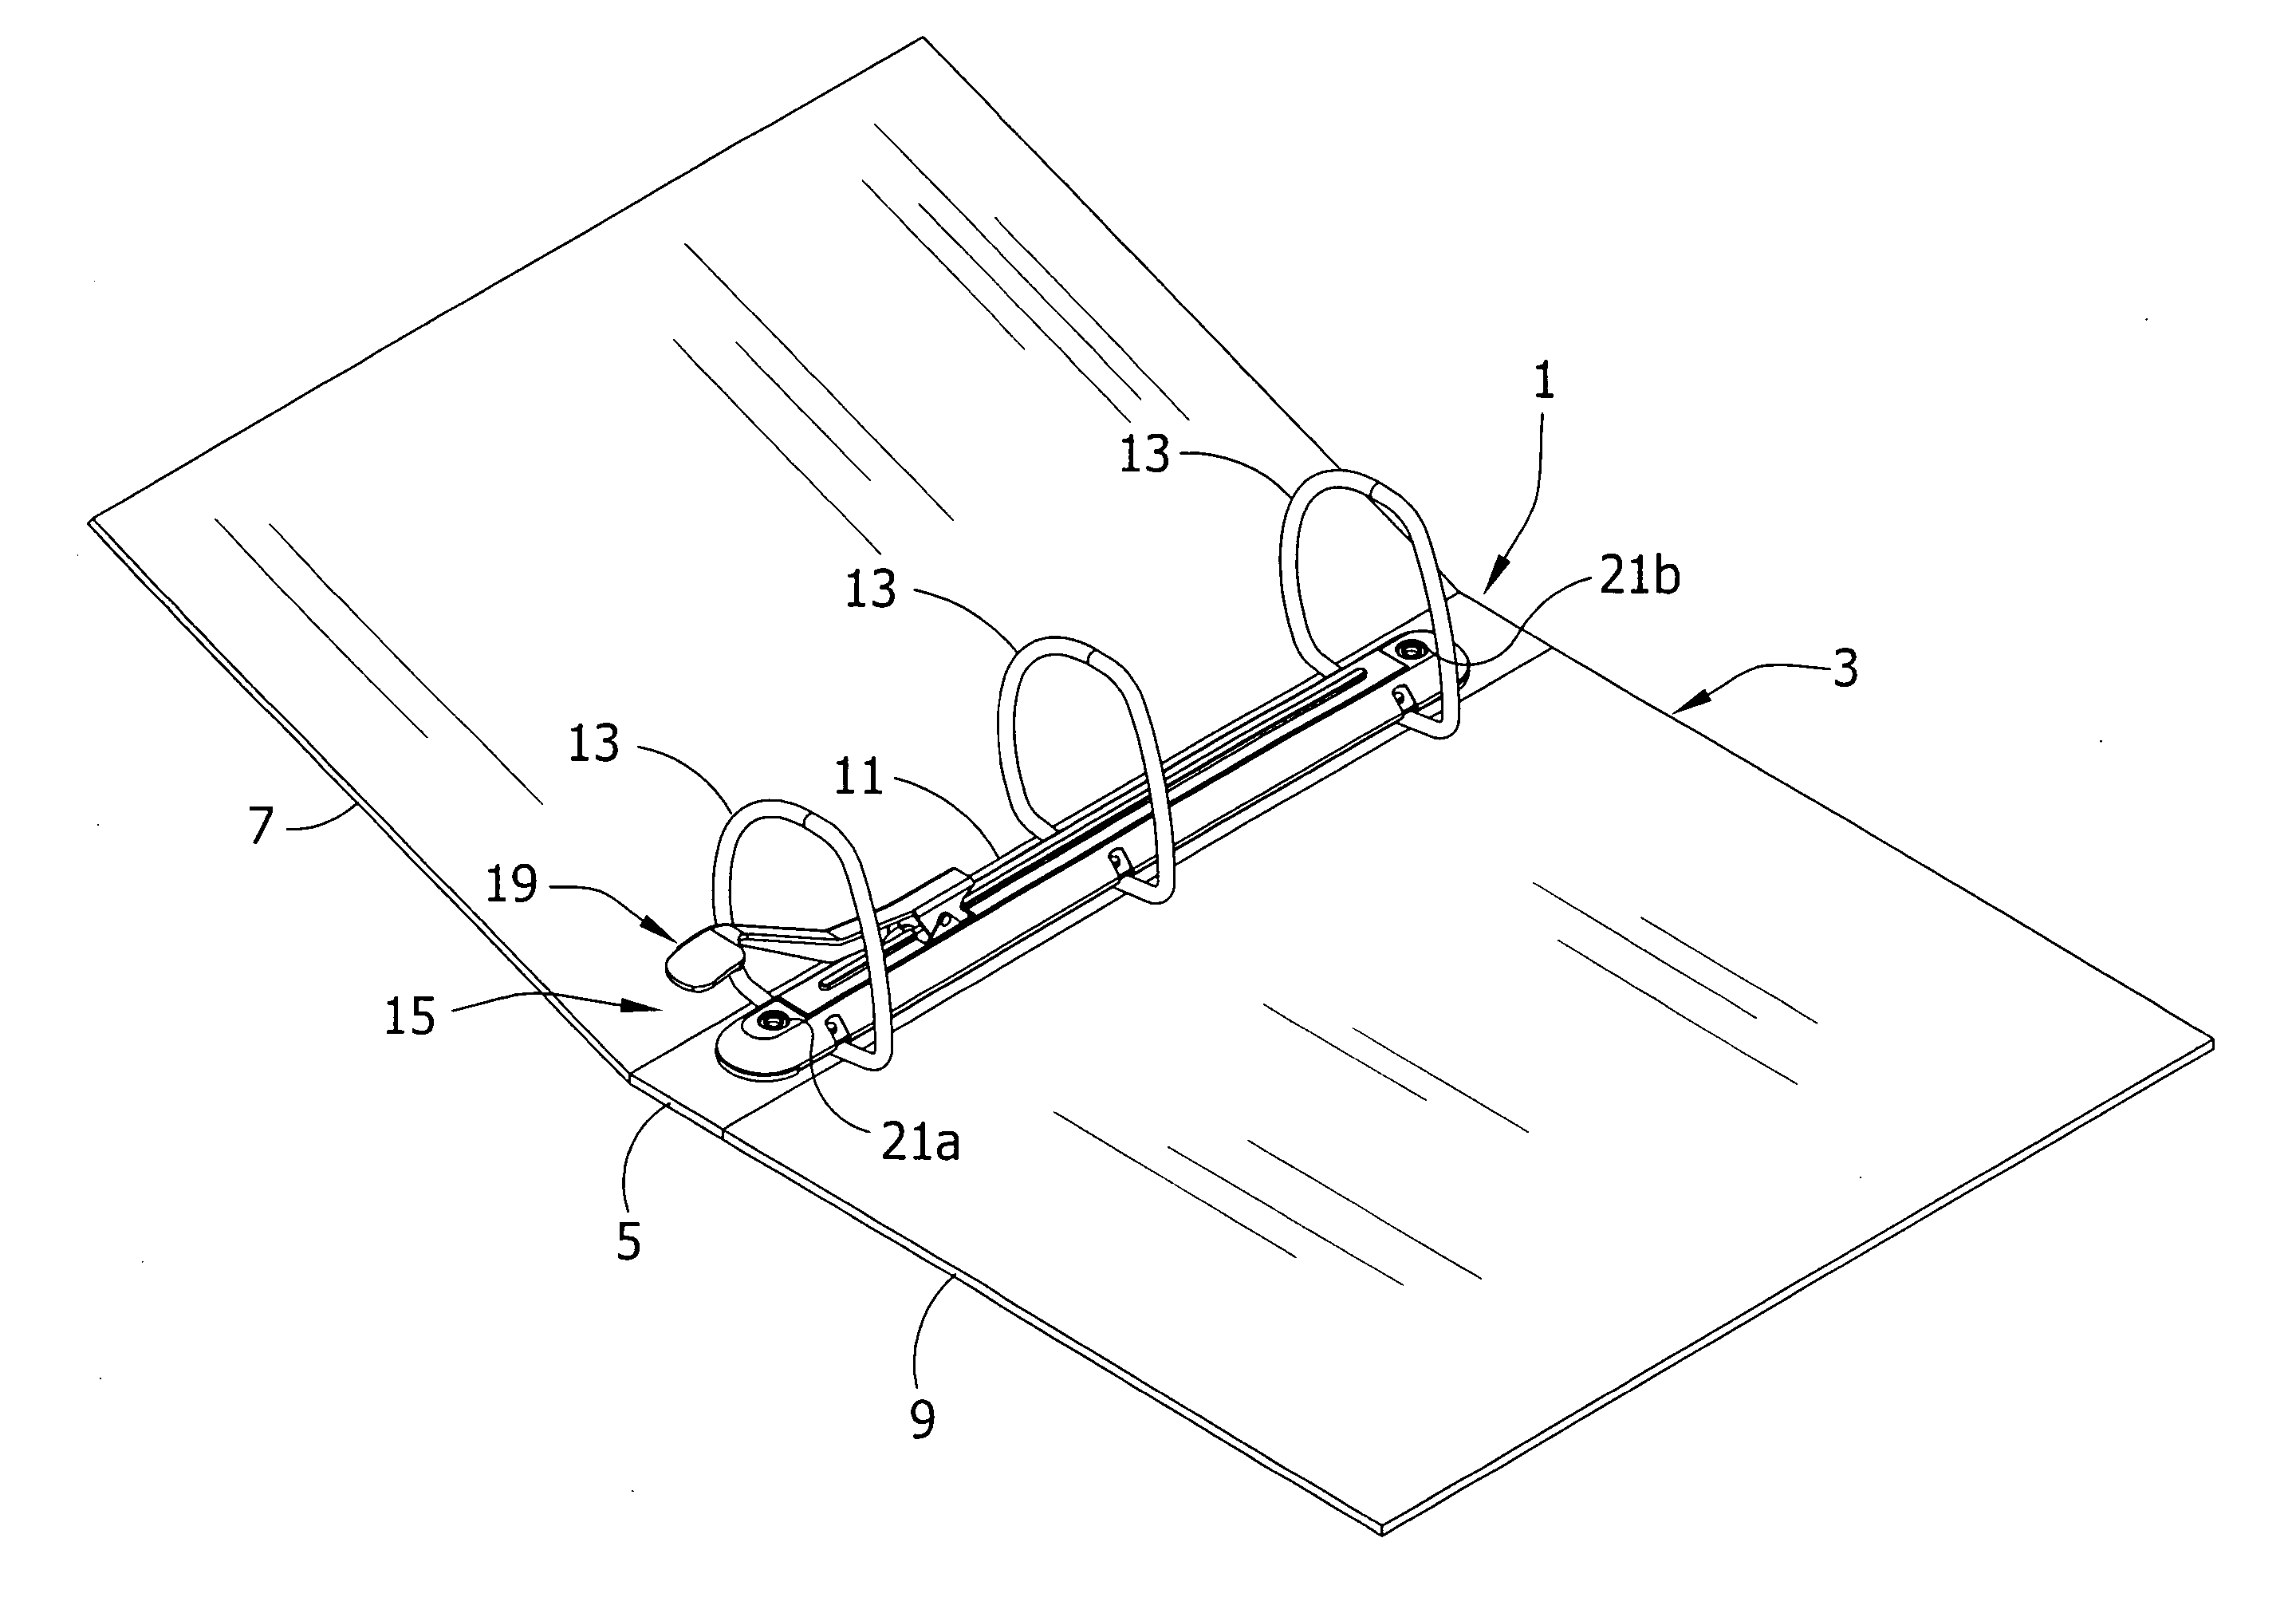 Ring binder mechanism with operating lever and travel bar